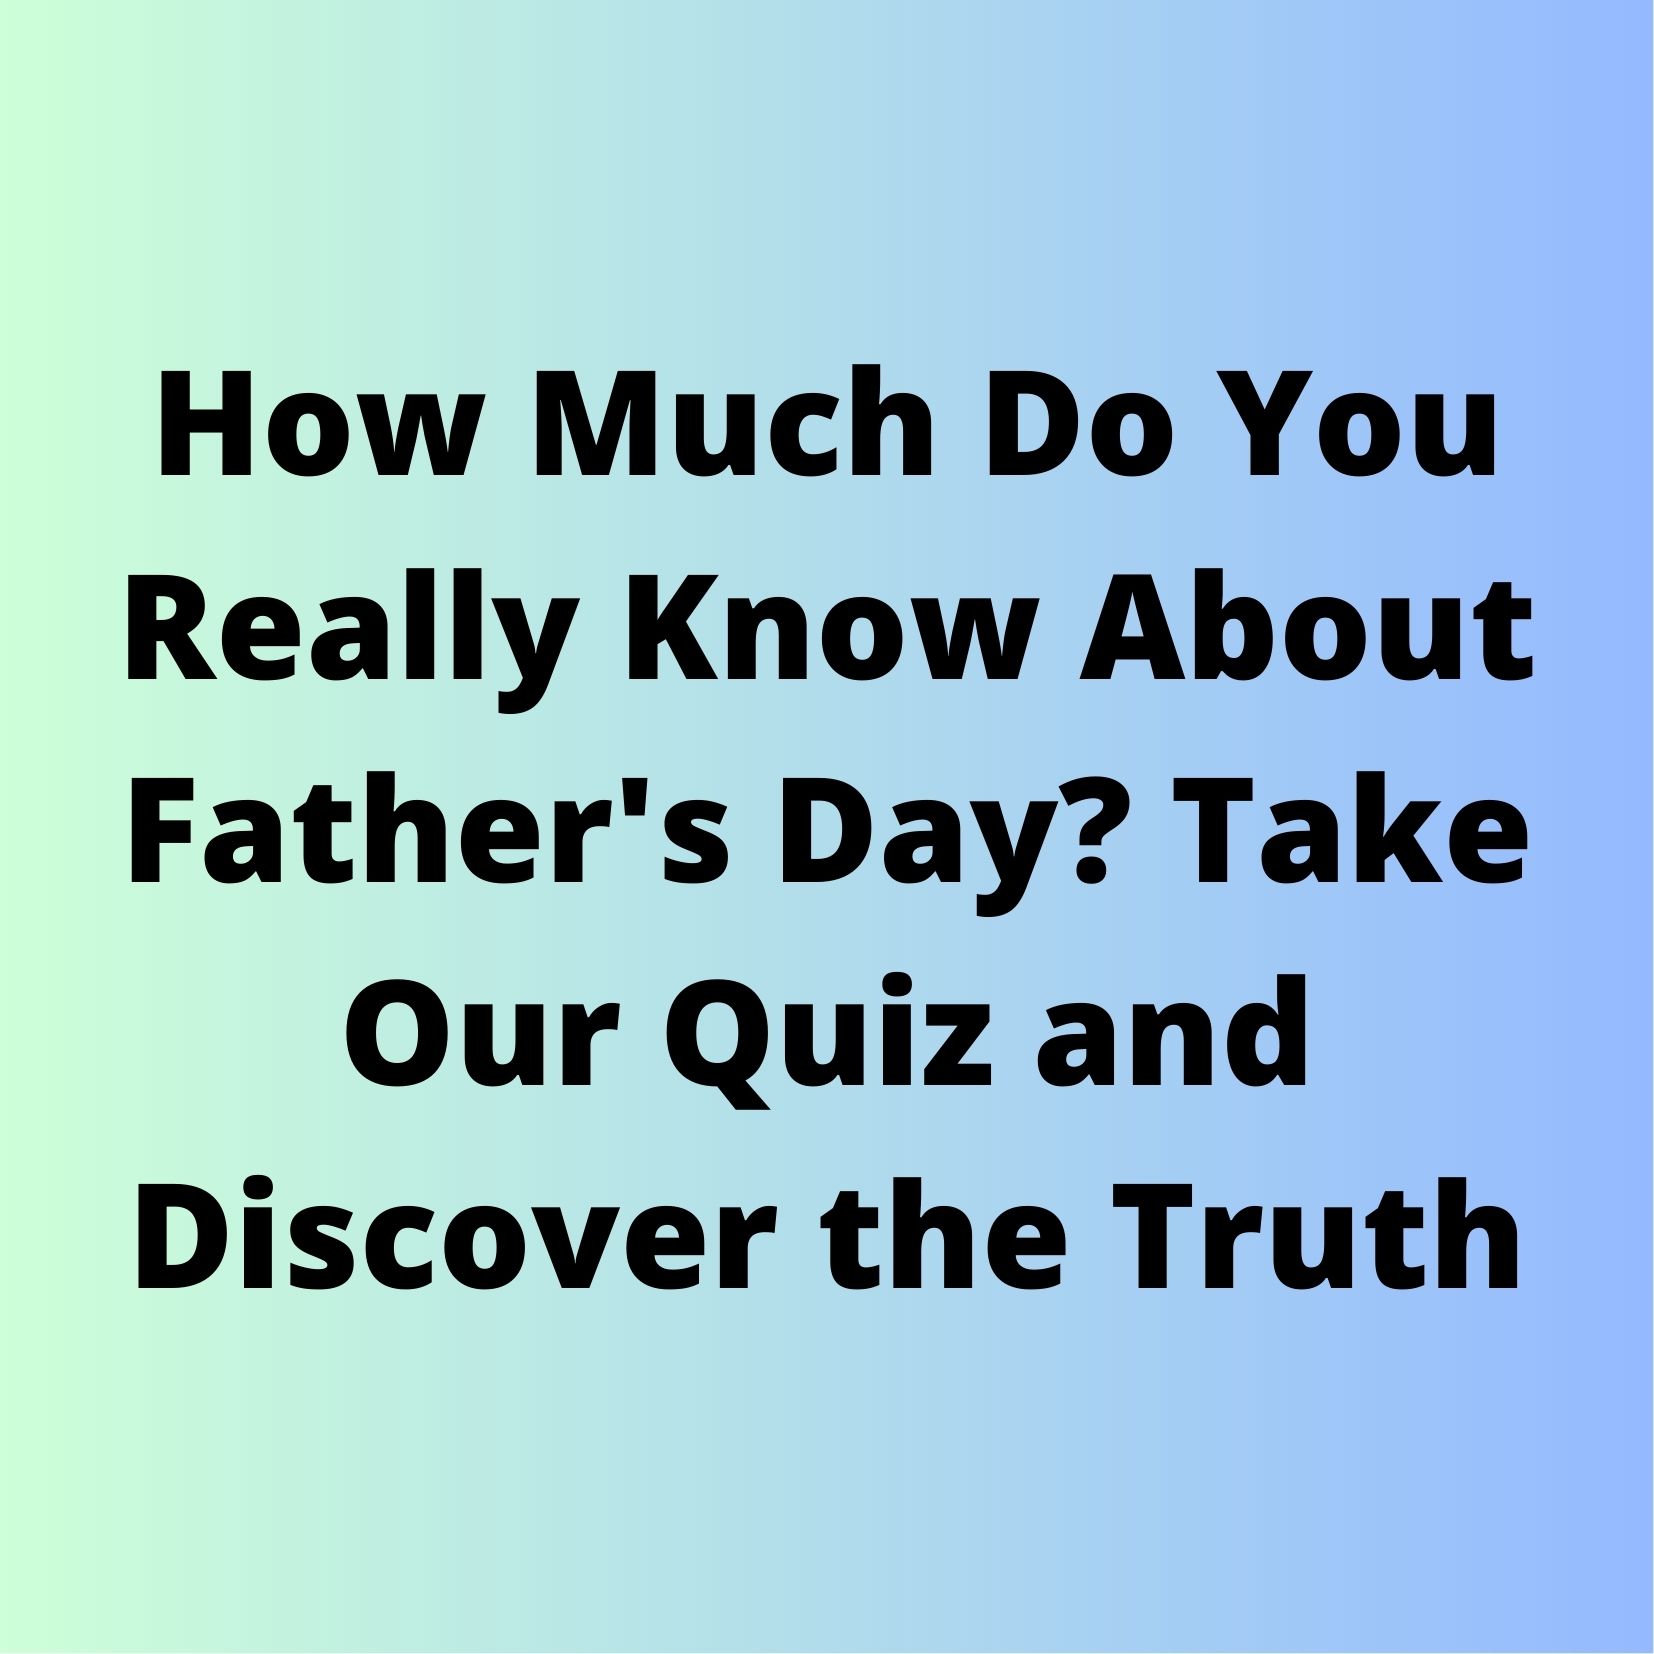 Put Your Father's Day Knowledge to the Test with Our Fun Challenge